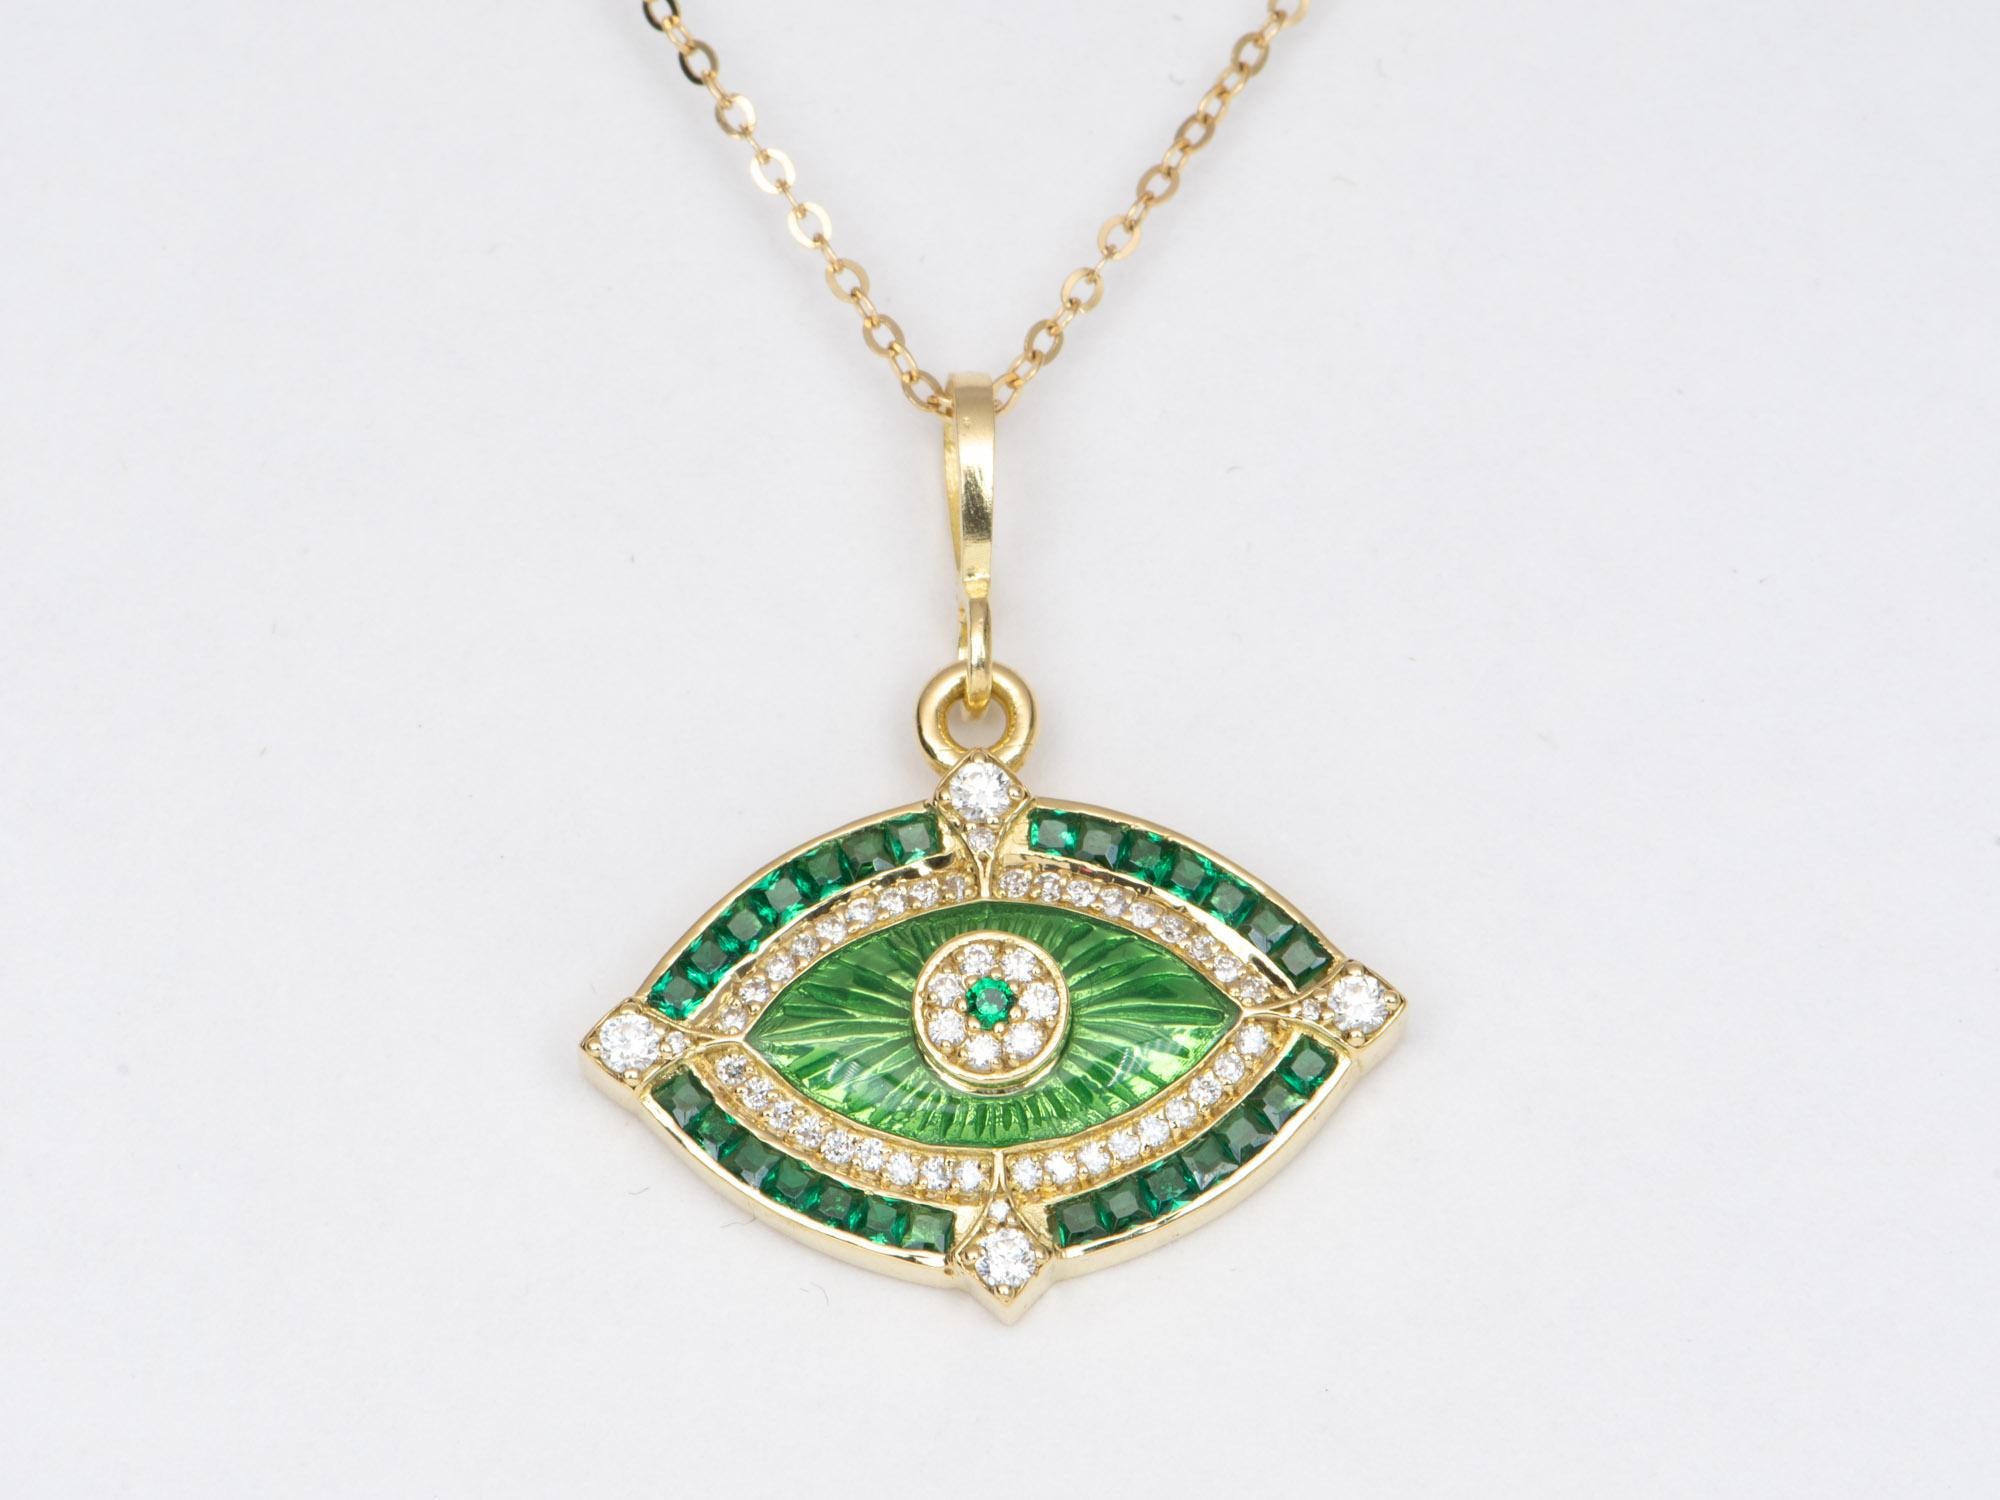 ♥ A solid 18K gold evil eye pendant featuring gorgeous princess-cut emeralds and diamonds
♥ This pendant features an inner halo of guilloche enamel
♥ The pendant measures 20mm in length, 24.2mm in width, and 4.8
♥ Material: 18K Gold

♥♥ Guilloche,